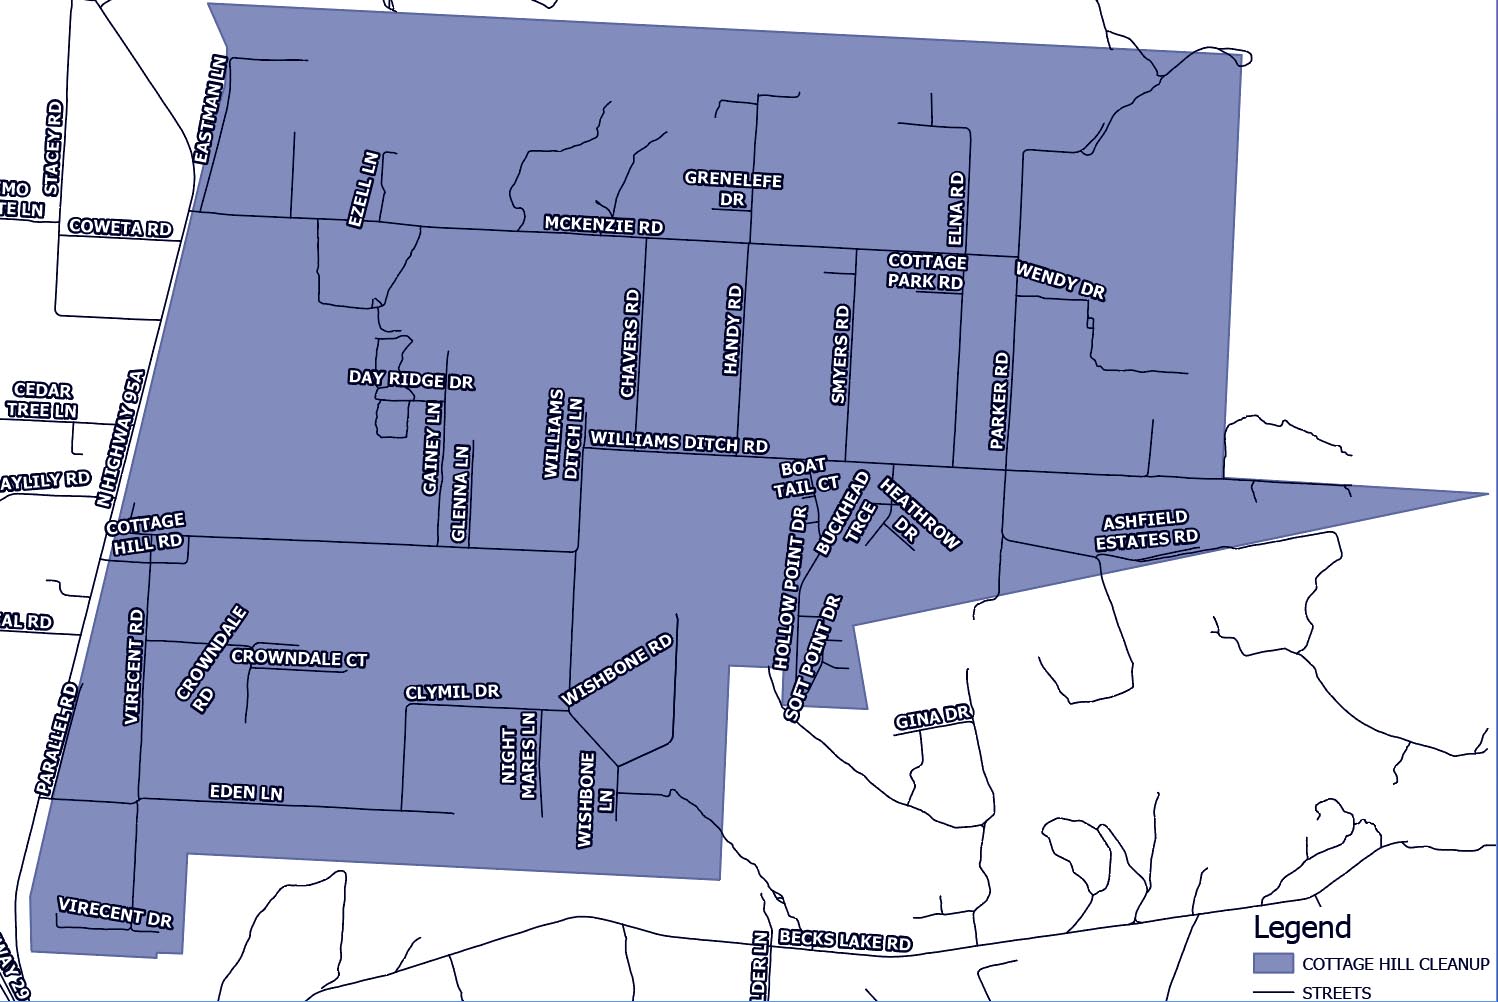 District 5 Cottage Hill Cleanup Map